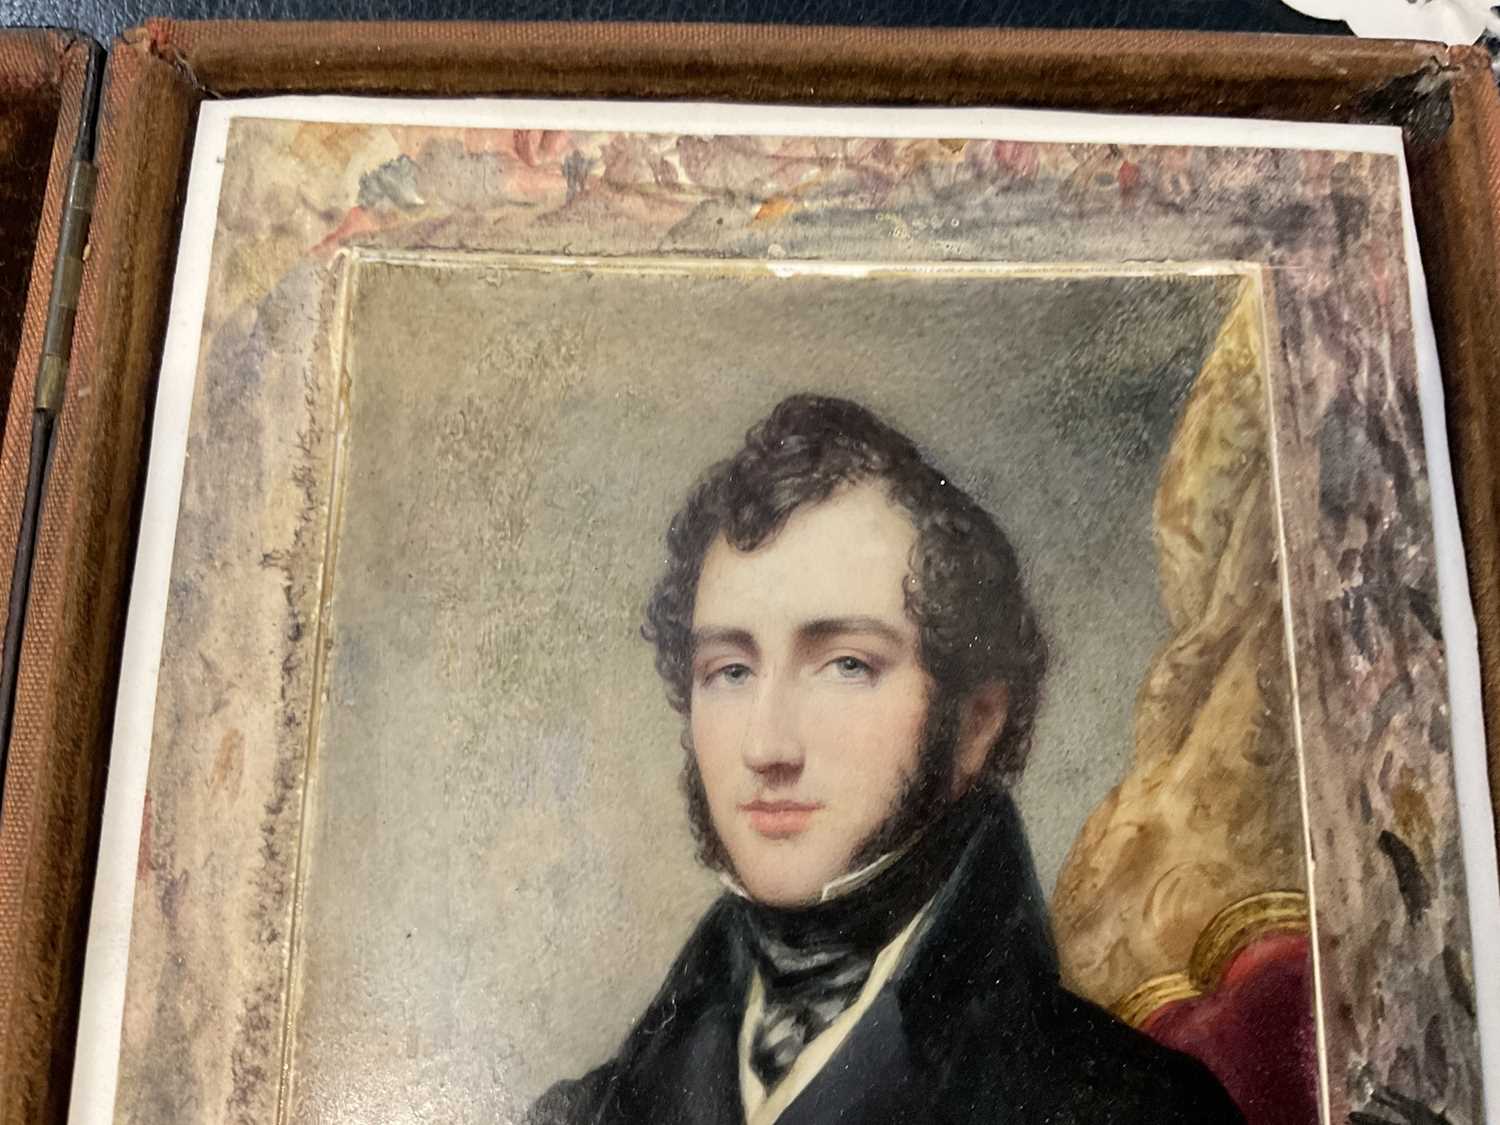 English School, circa 1830, portrait miniature on ivory depicting a young gentleman in black jacket - Image 7 of 9